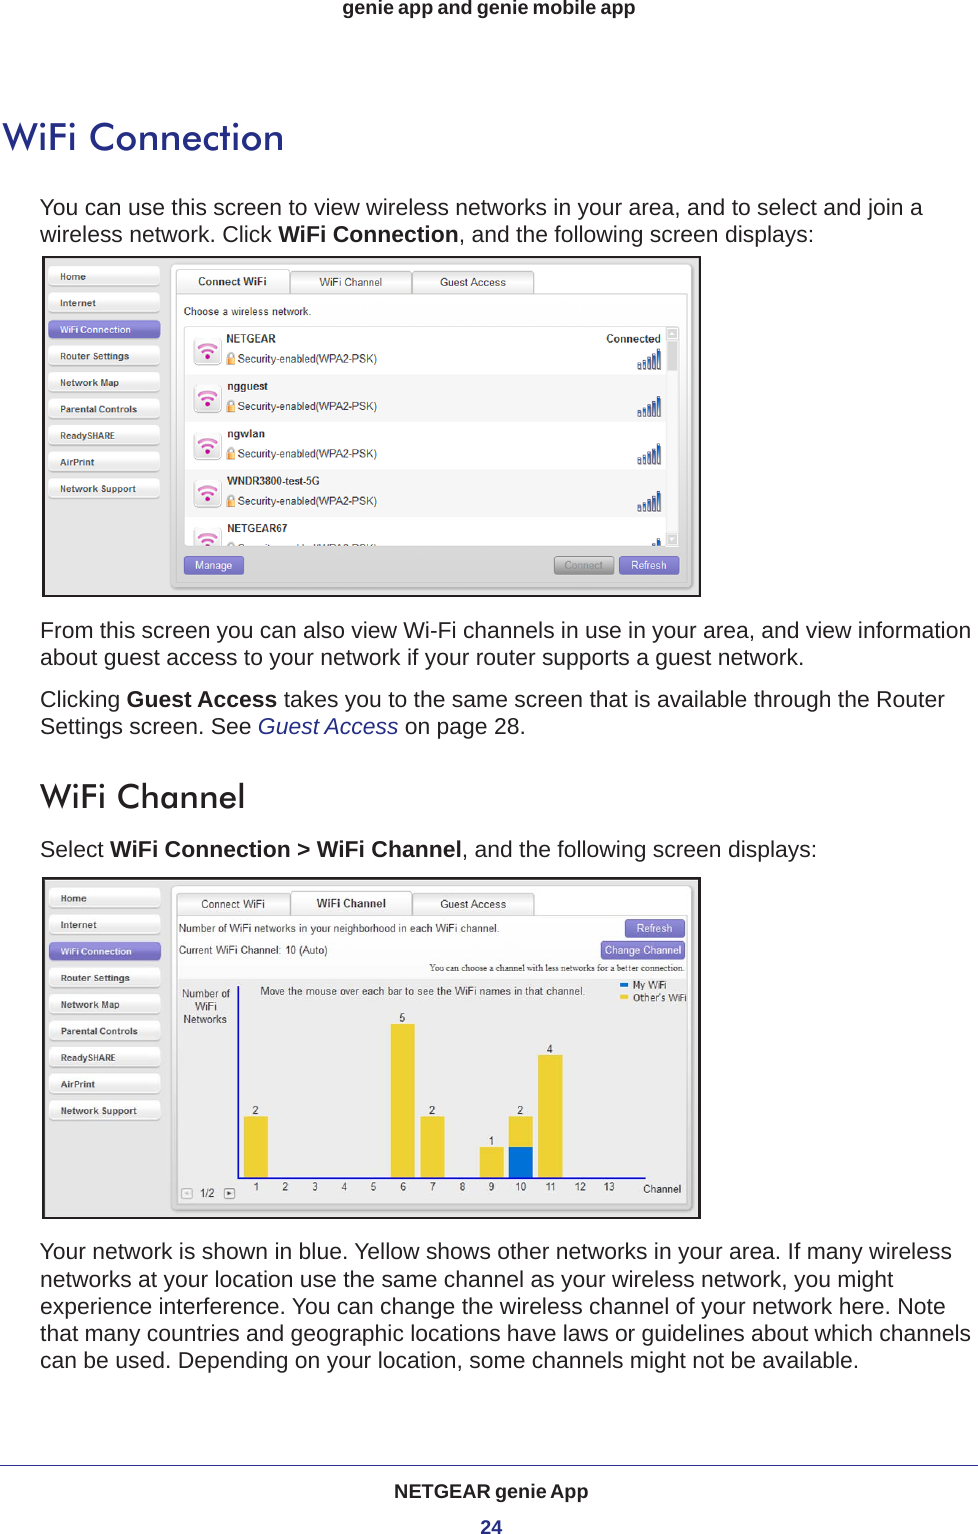 NETGEAR genie App24genie app and genie mobile app WiFi ConnectionYou can use this screen to view wireless networks in your area, and to select and join a wireless network. Click WiFi Connection, and the following screen displays:From this screen you can also view Wi-Fi channels in use in your area, and view information about guest access to your network if your router supports a guest network. Clicking Guest Access takes you to the same screen that is available through the Router Settings screen. See Guest Access on page  28.WiFi ChannelSelect WiFi Connection &gt; WiFi Channel, and the following screen displays:Your network is shown in blue. Yellow shows other networks in your area. If many wireless networks at your location use the same channel as your wireless network, you might experience interference. You can change the wireless channel of your network here. Note that many countries and geographic locations have laws or guidelines about which channels can be used. Depending on your location, some channels might not be available.